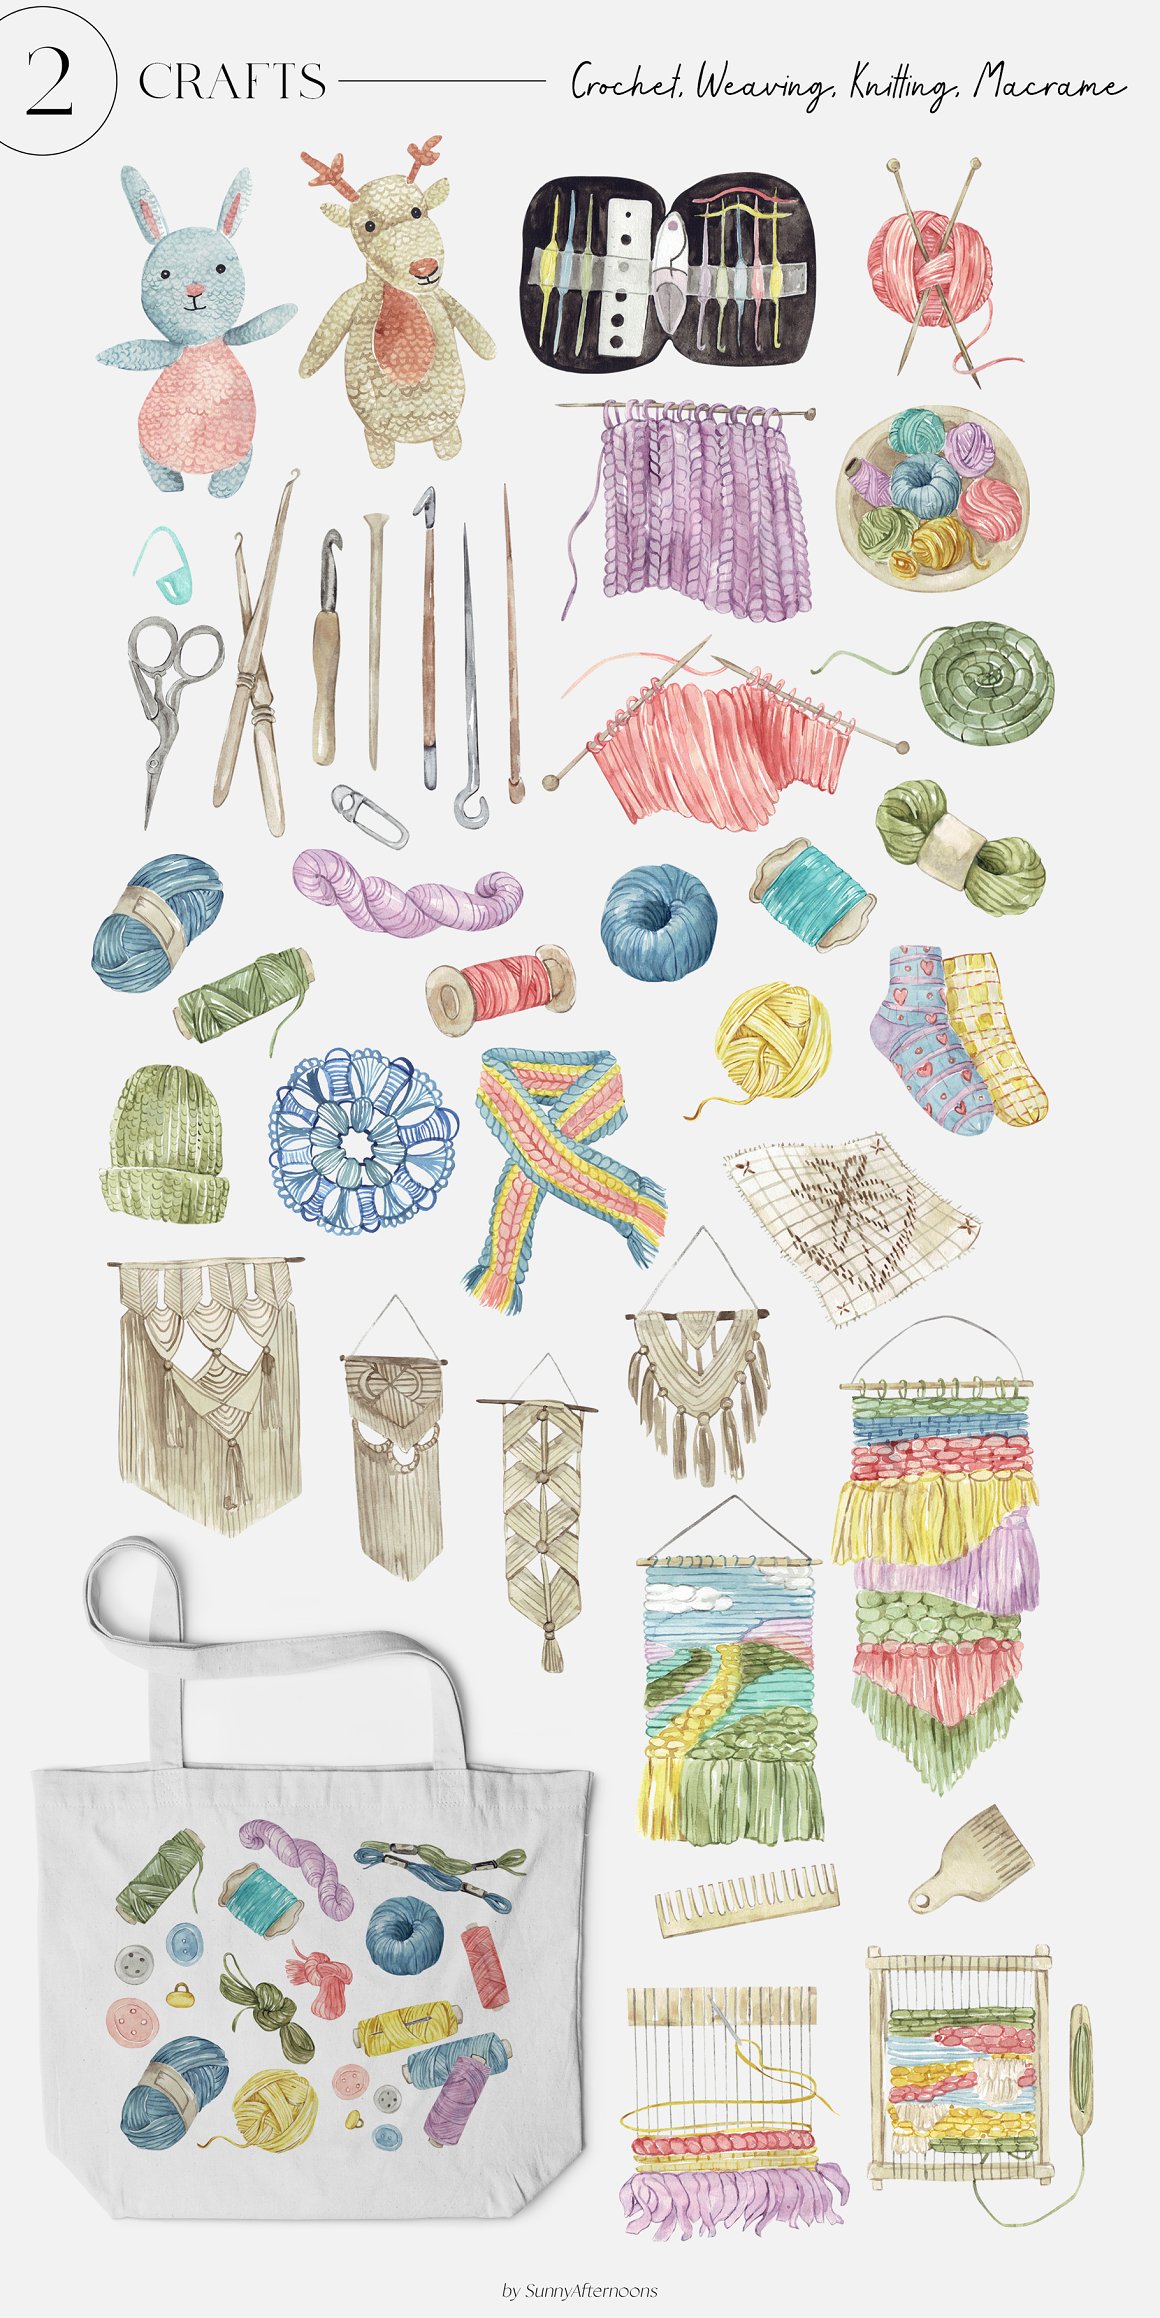 Image of Sewing items.